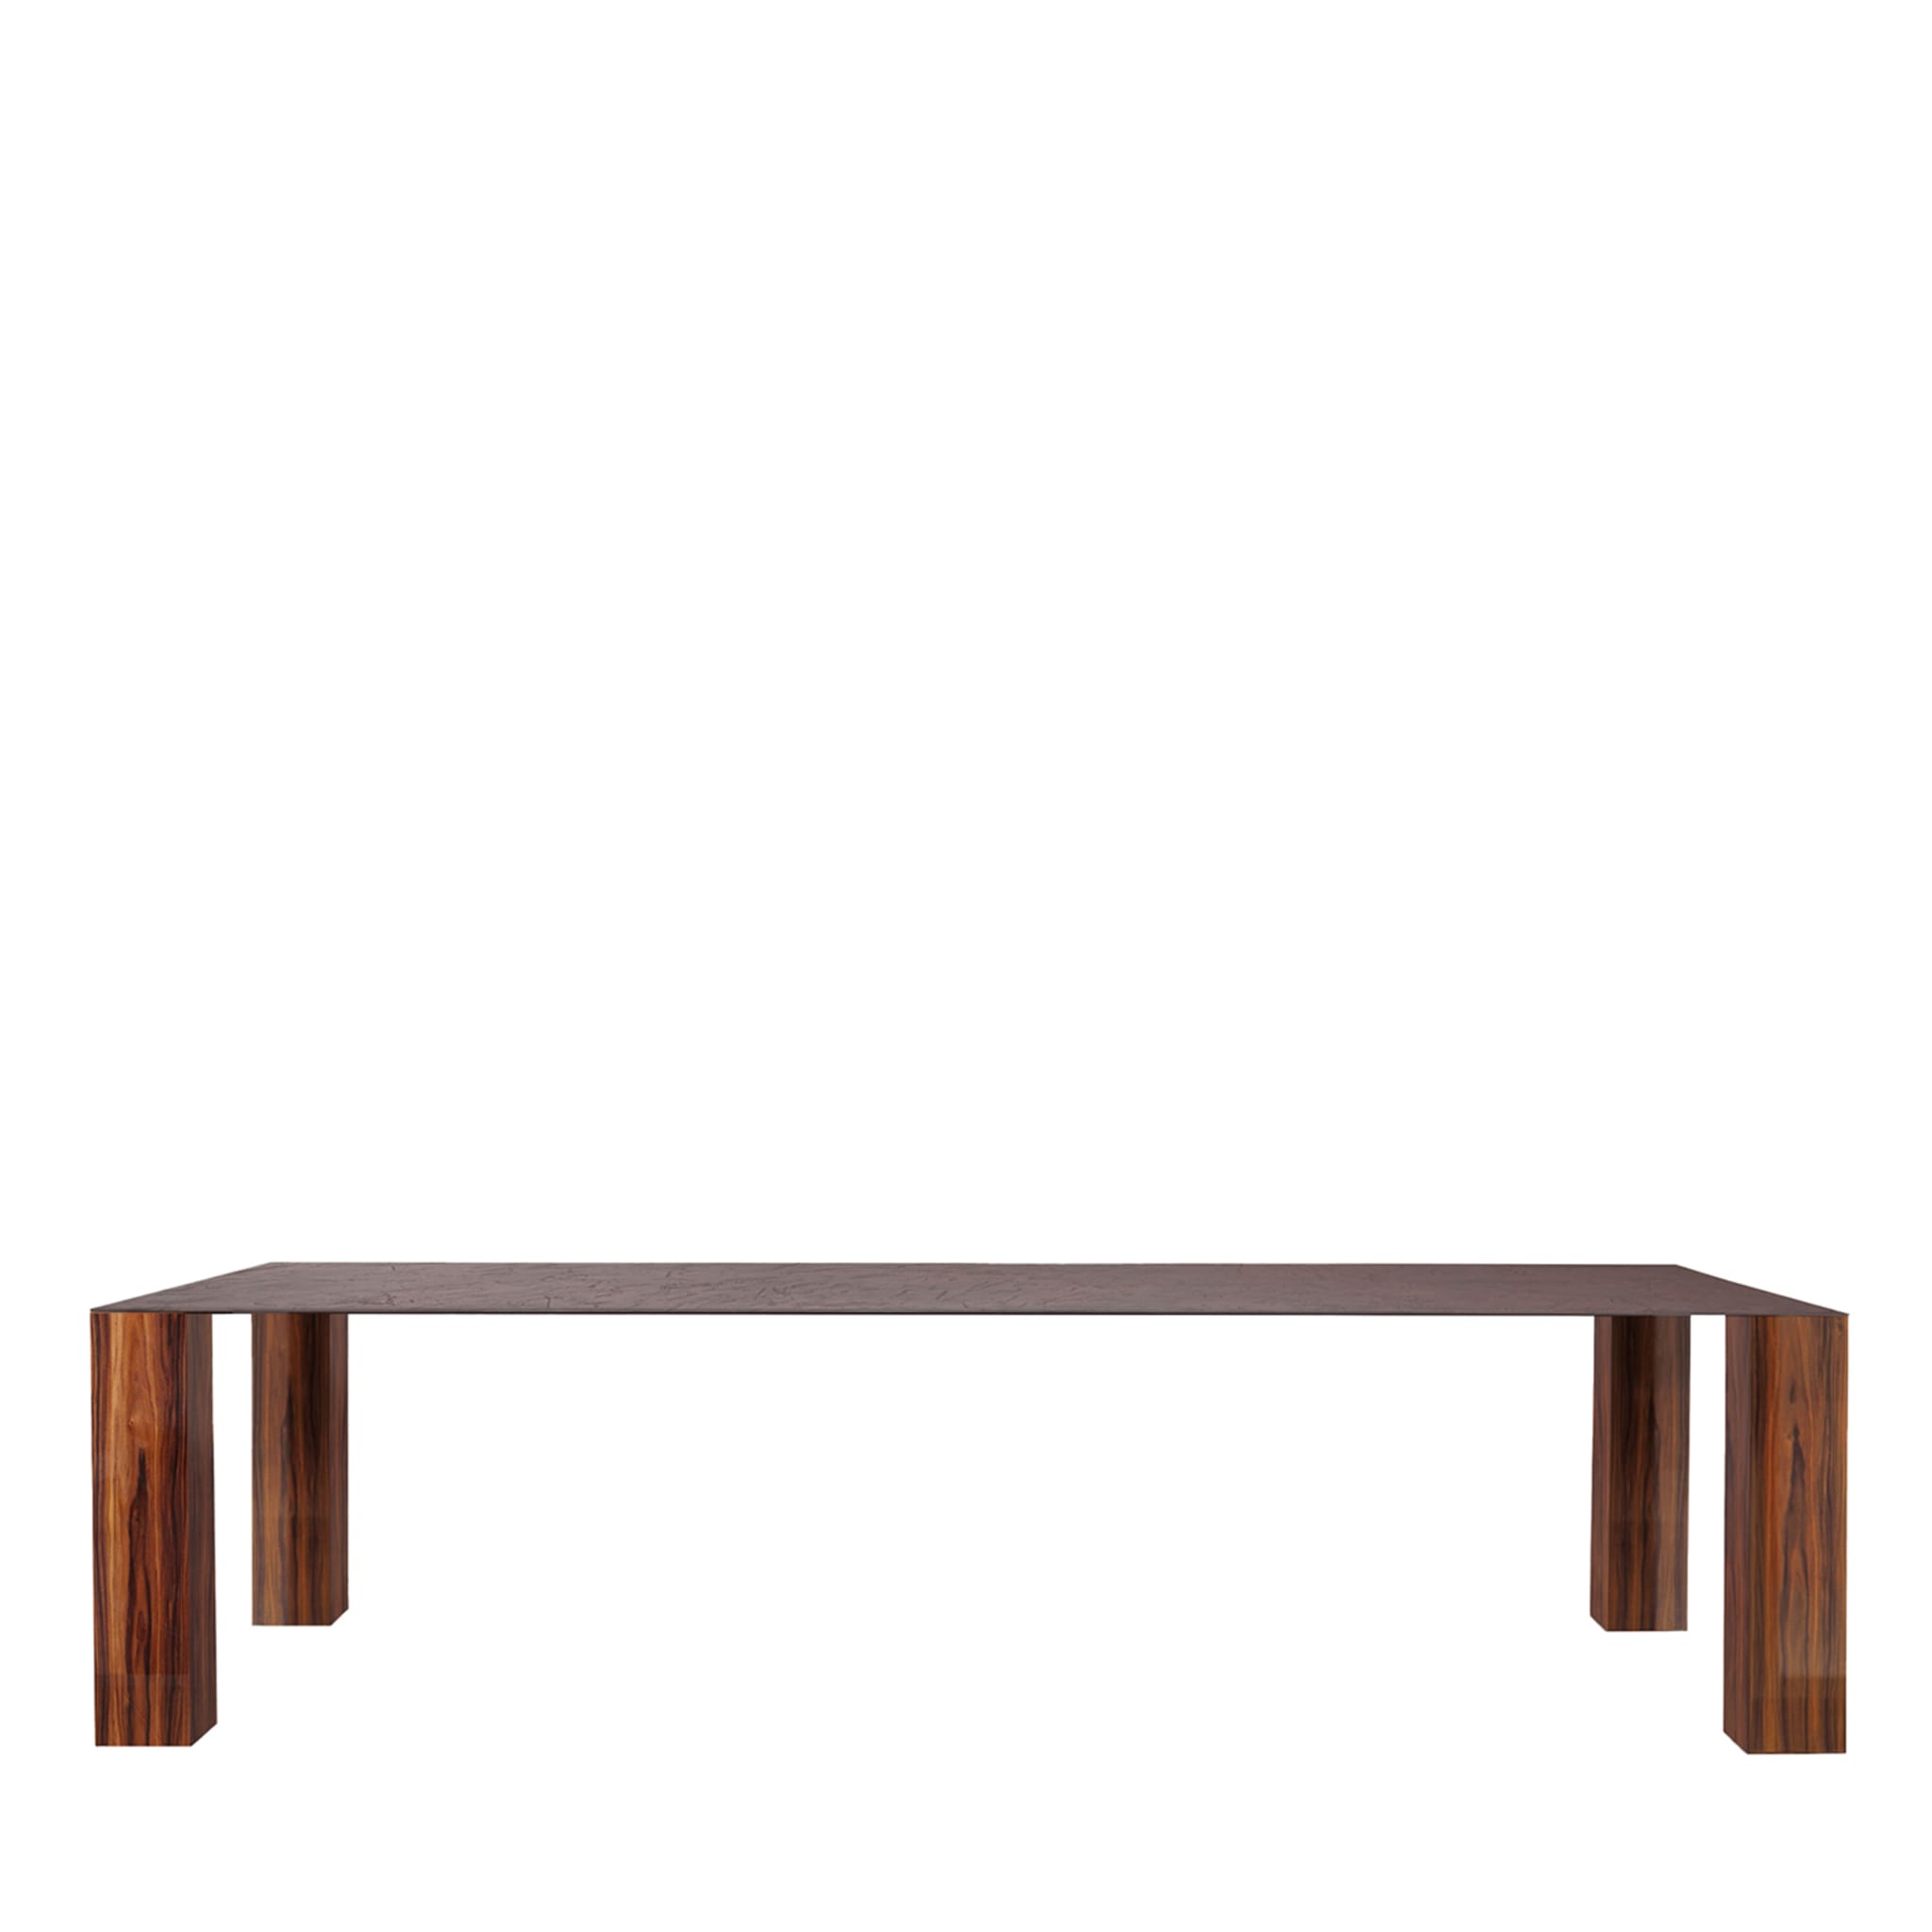 Slim Dining Table by Dainelli Studio - Main view